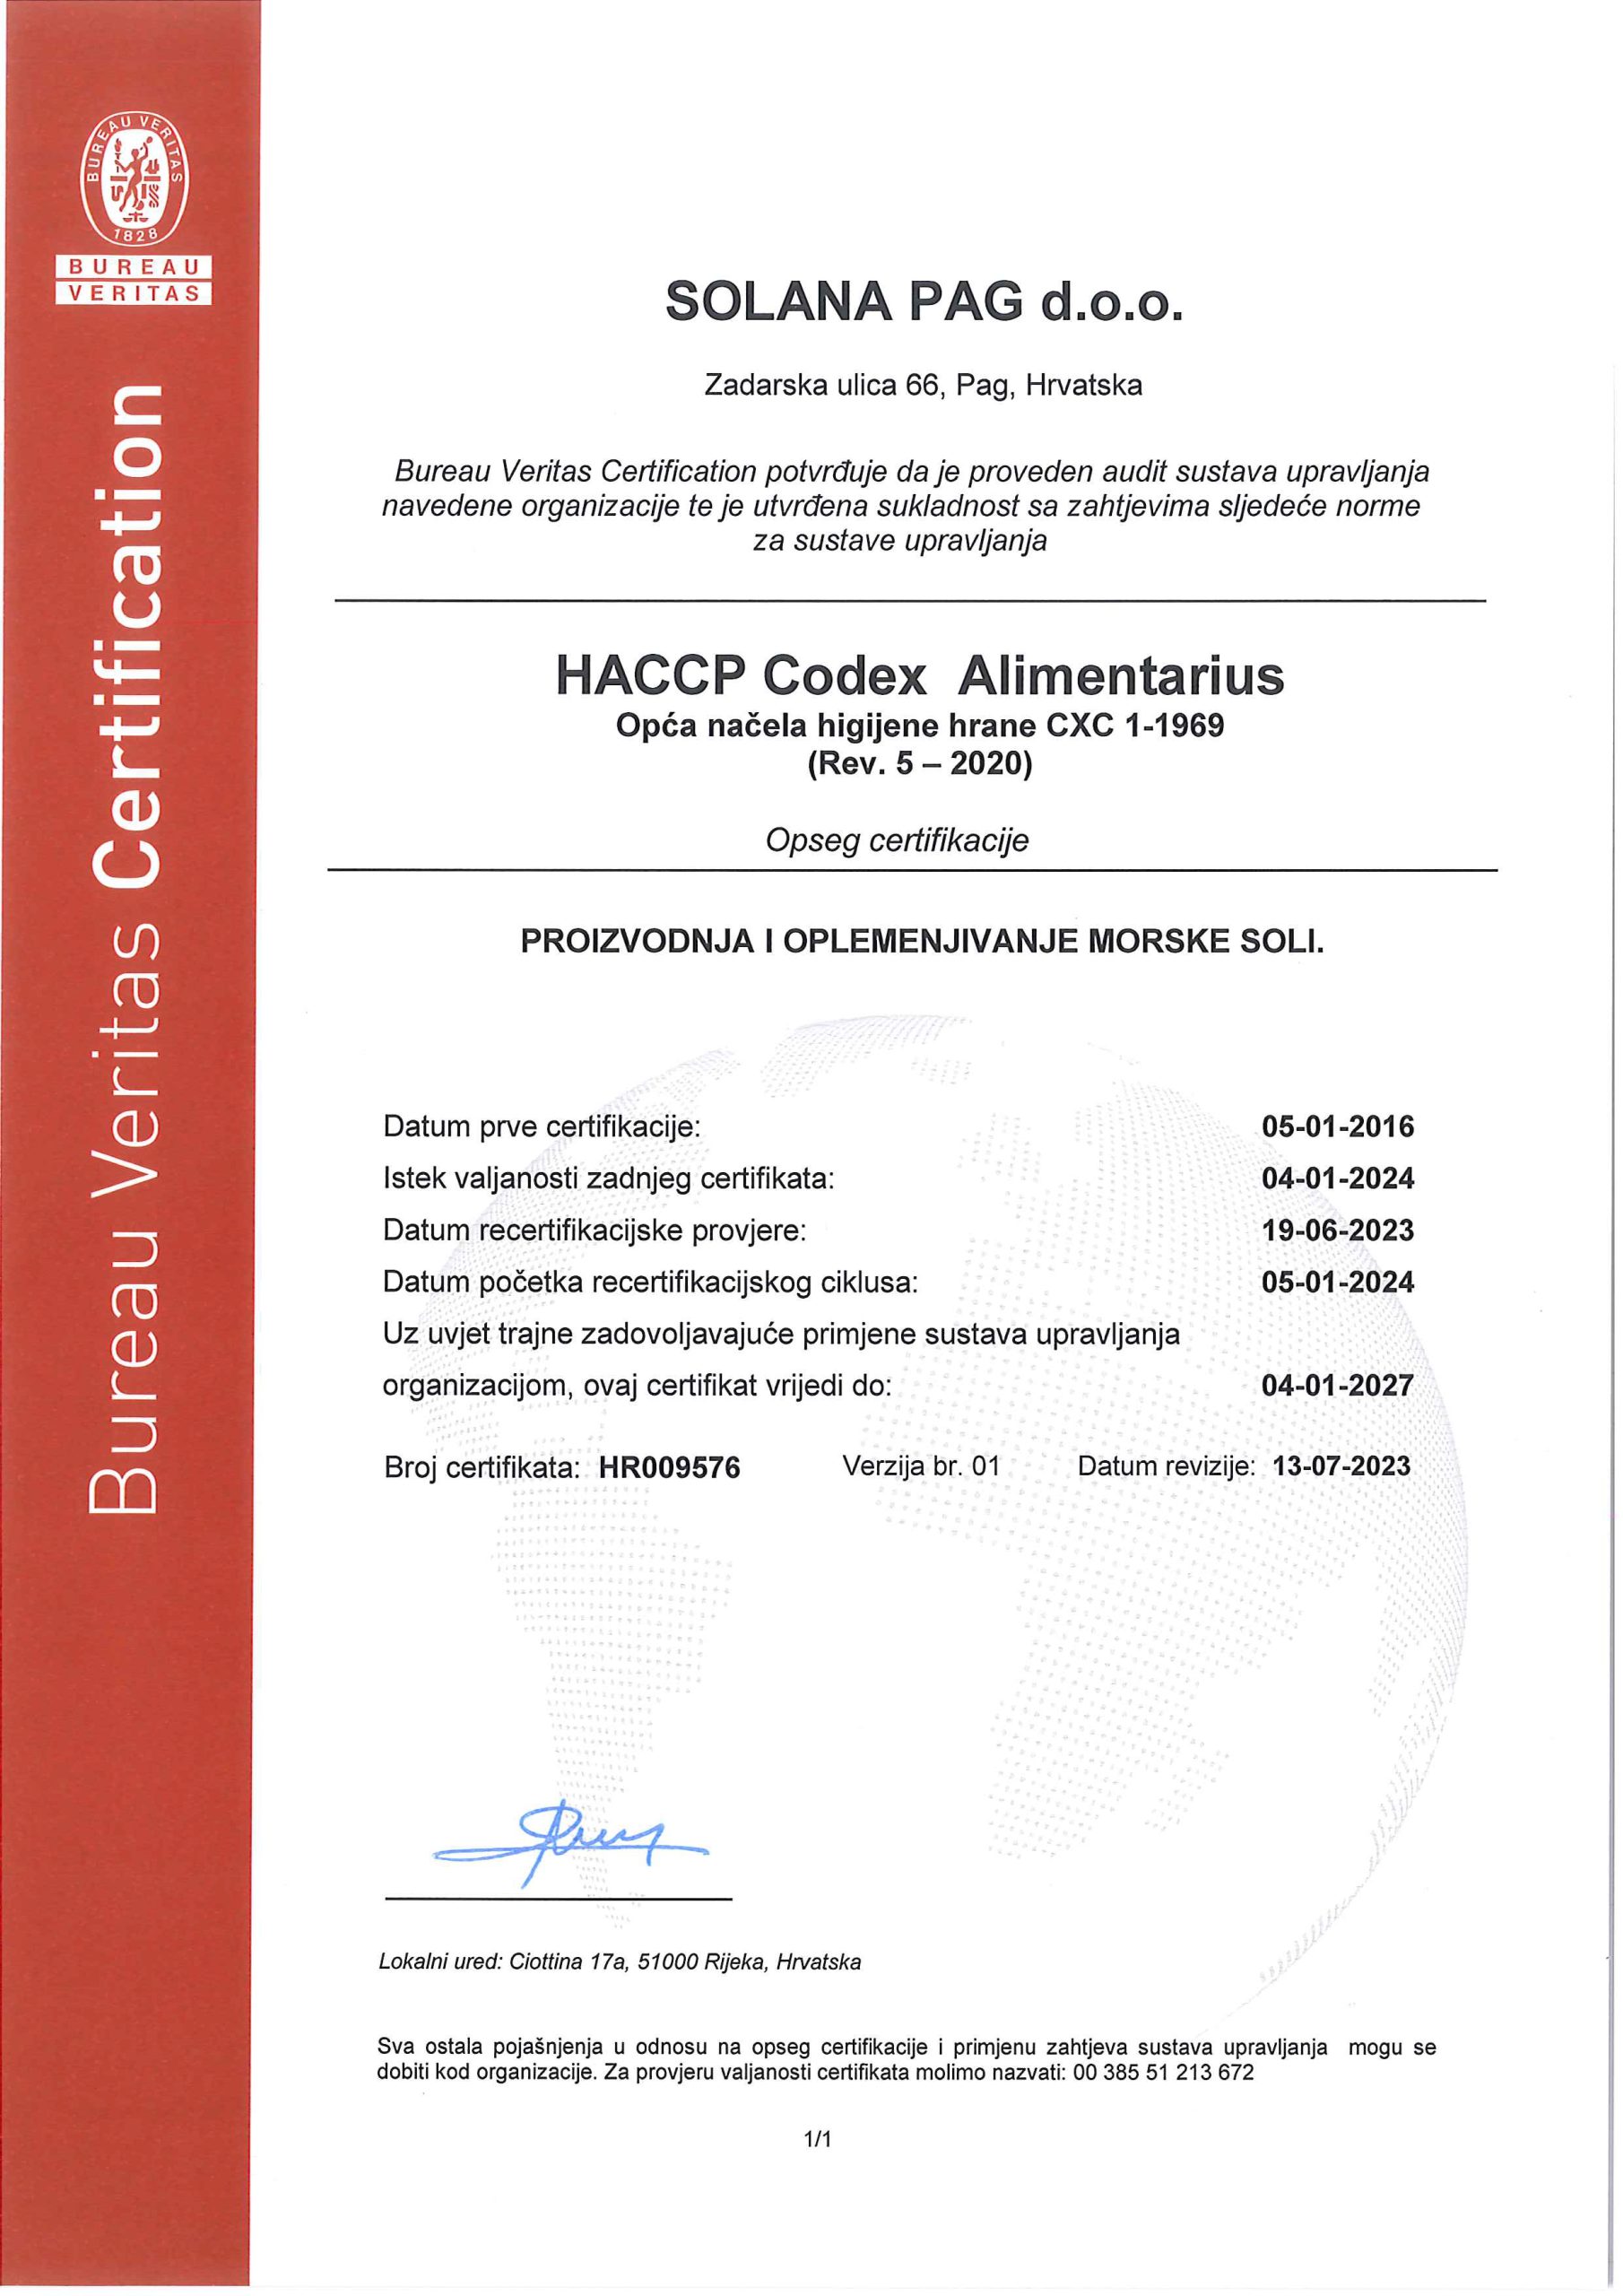 HACCP Certificate for Solana Pag 2024-2027